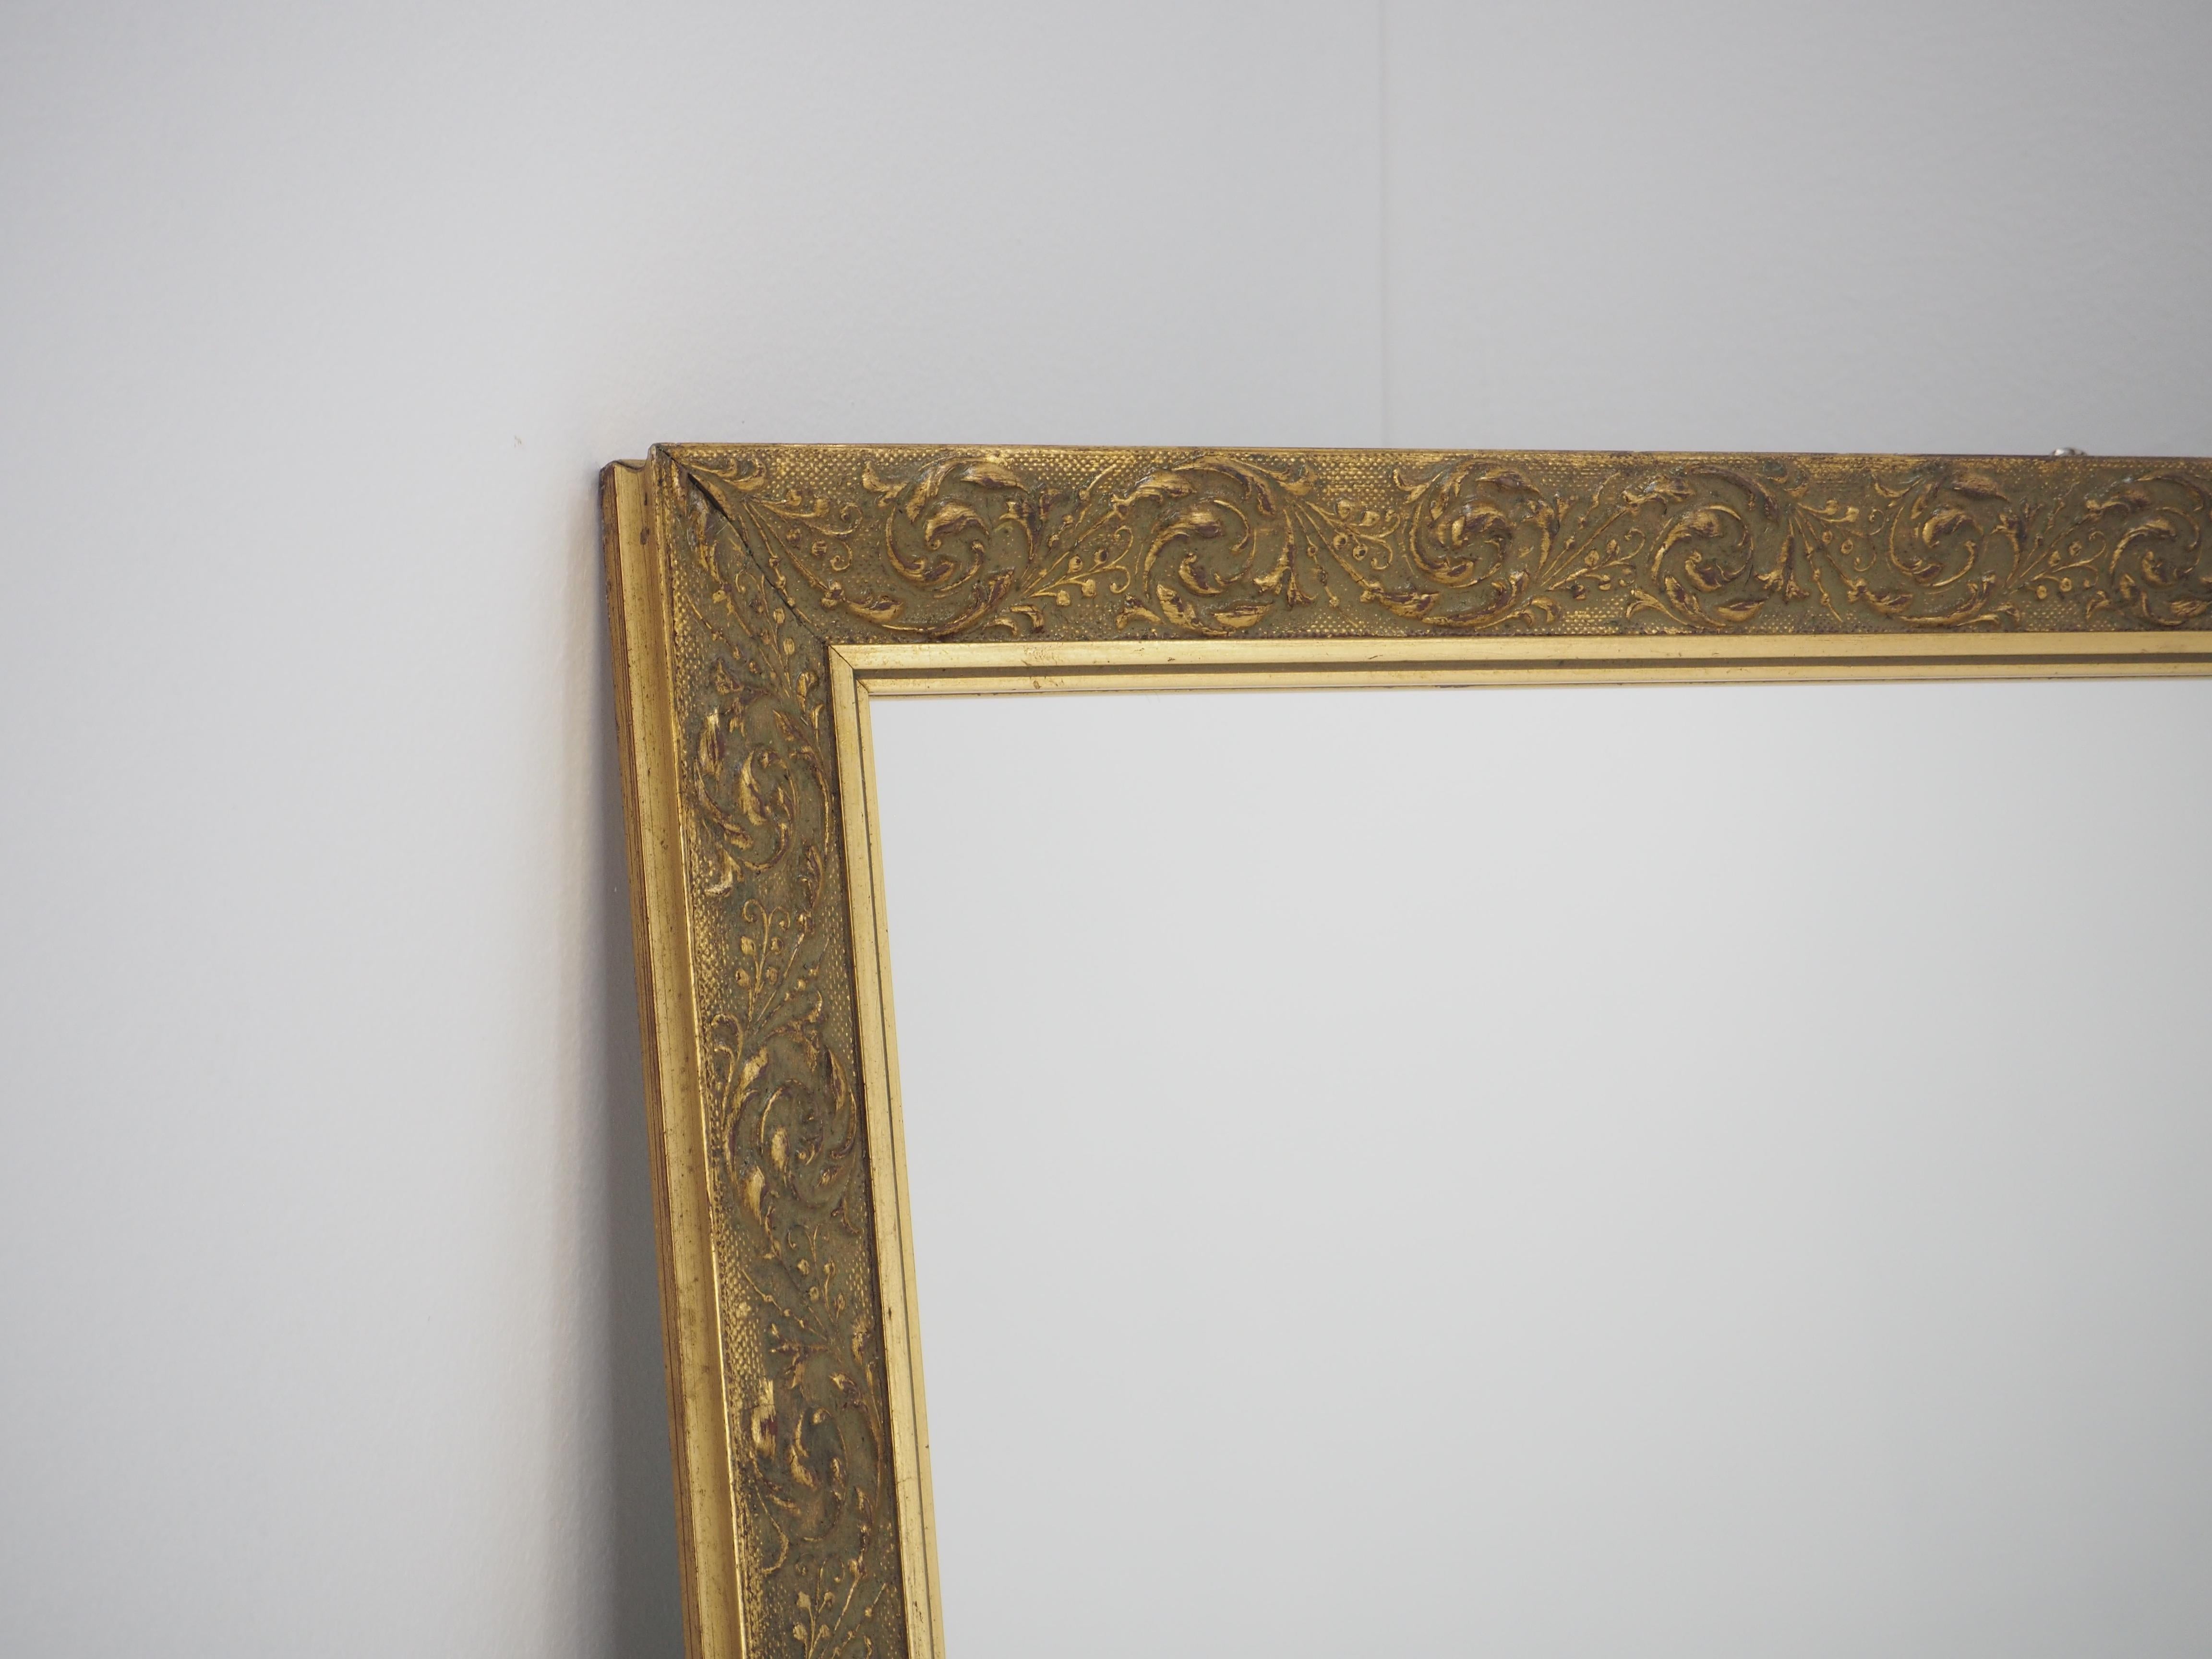 - Wood frame
- Handmade
- Original condition
- Mirror is the new.